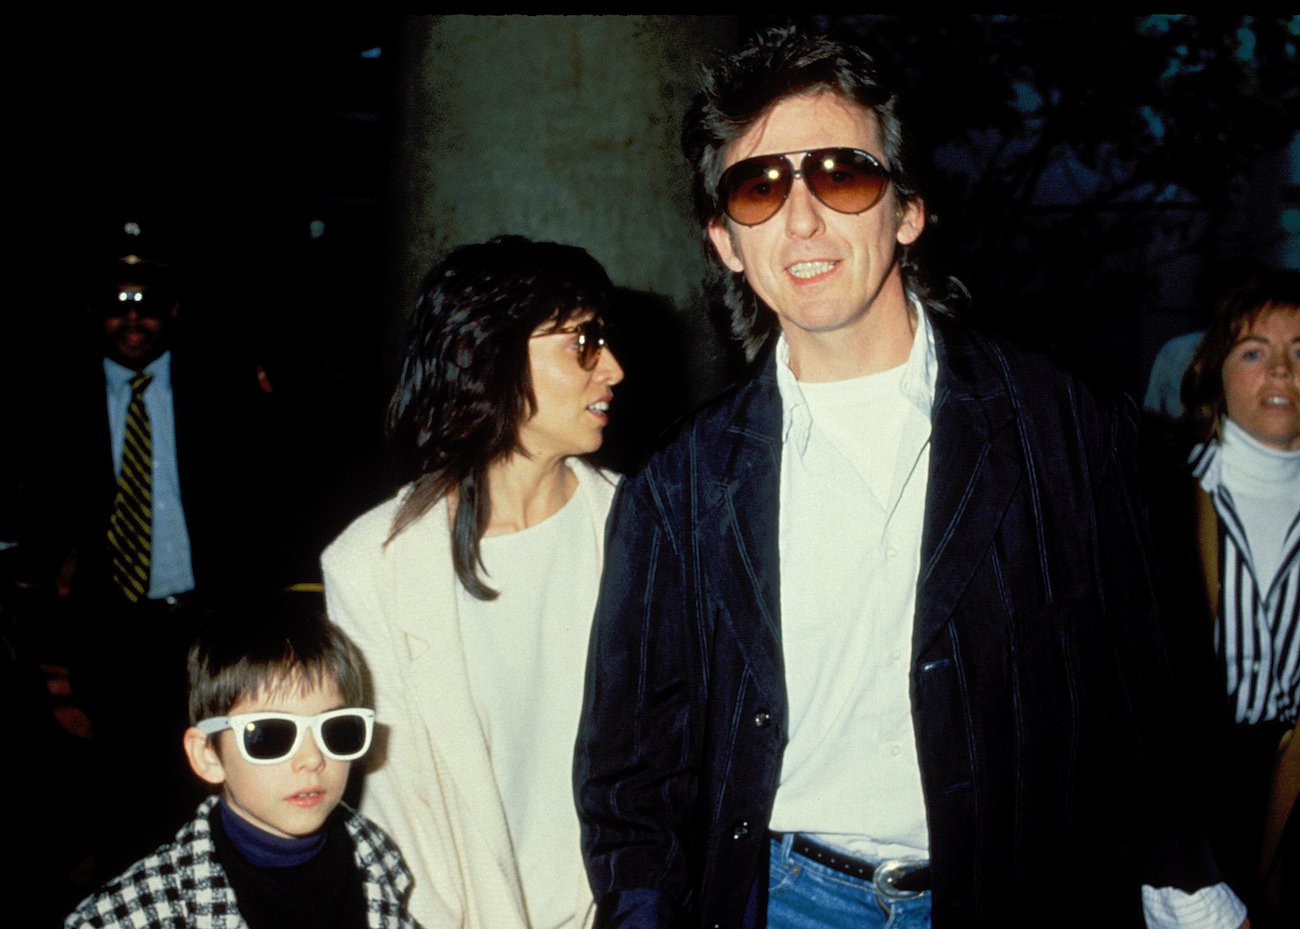 George Harrison, his wife, Olivia, and their son, Dhani, at LAX Airport in 1988.